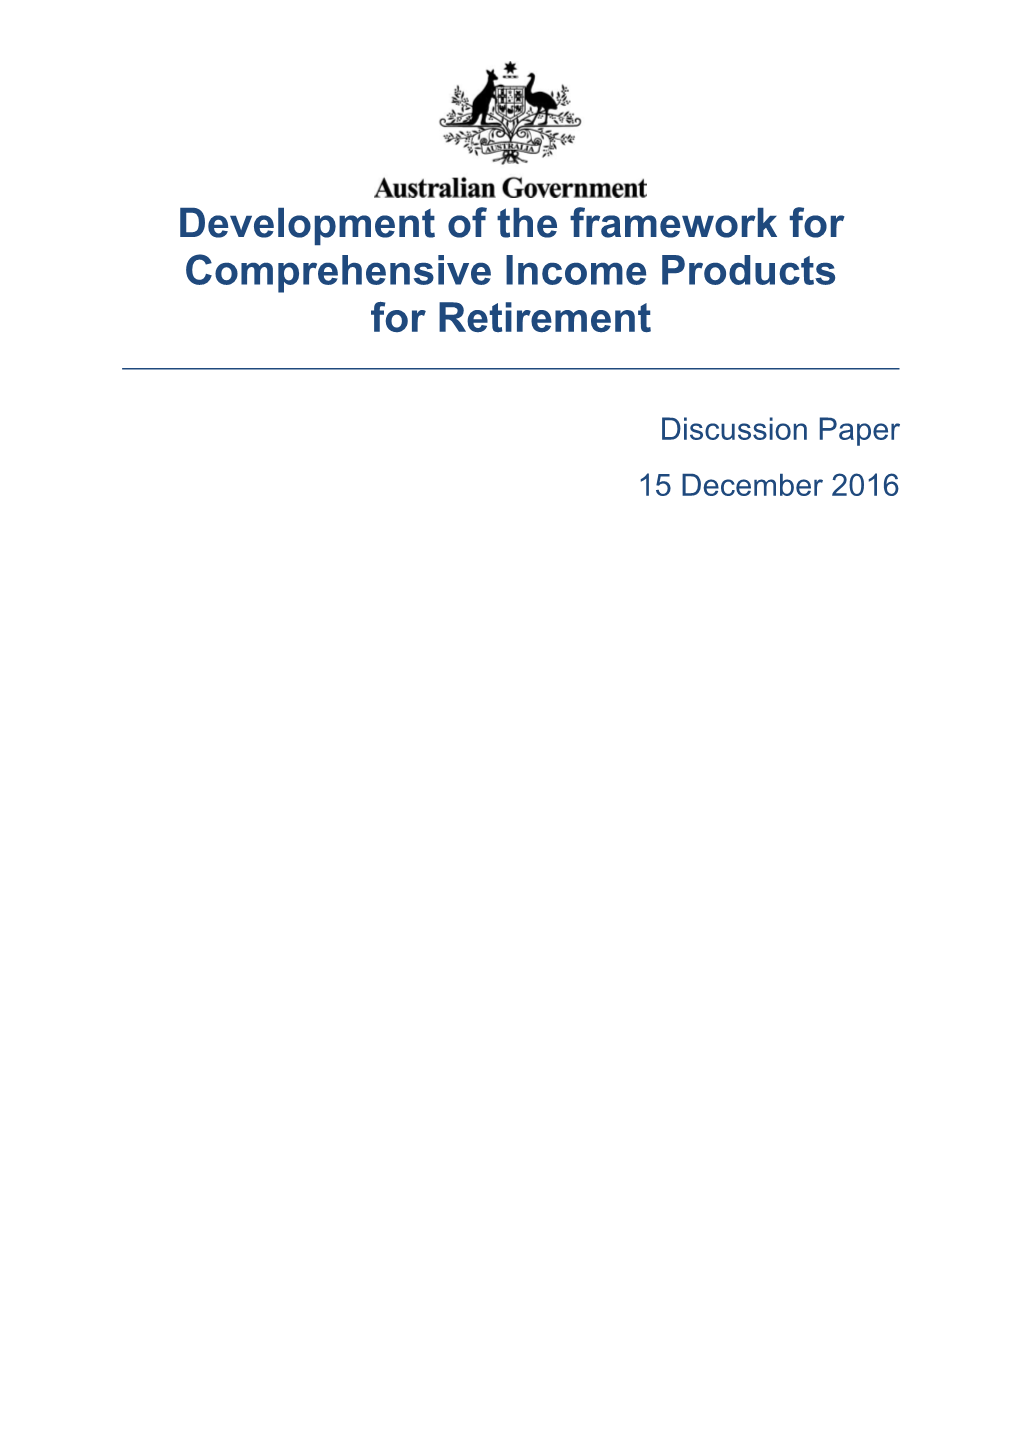 Development of the Framework for Comprehensive Income Products for Retirement Discussion Paper